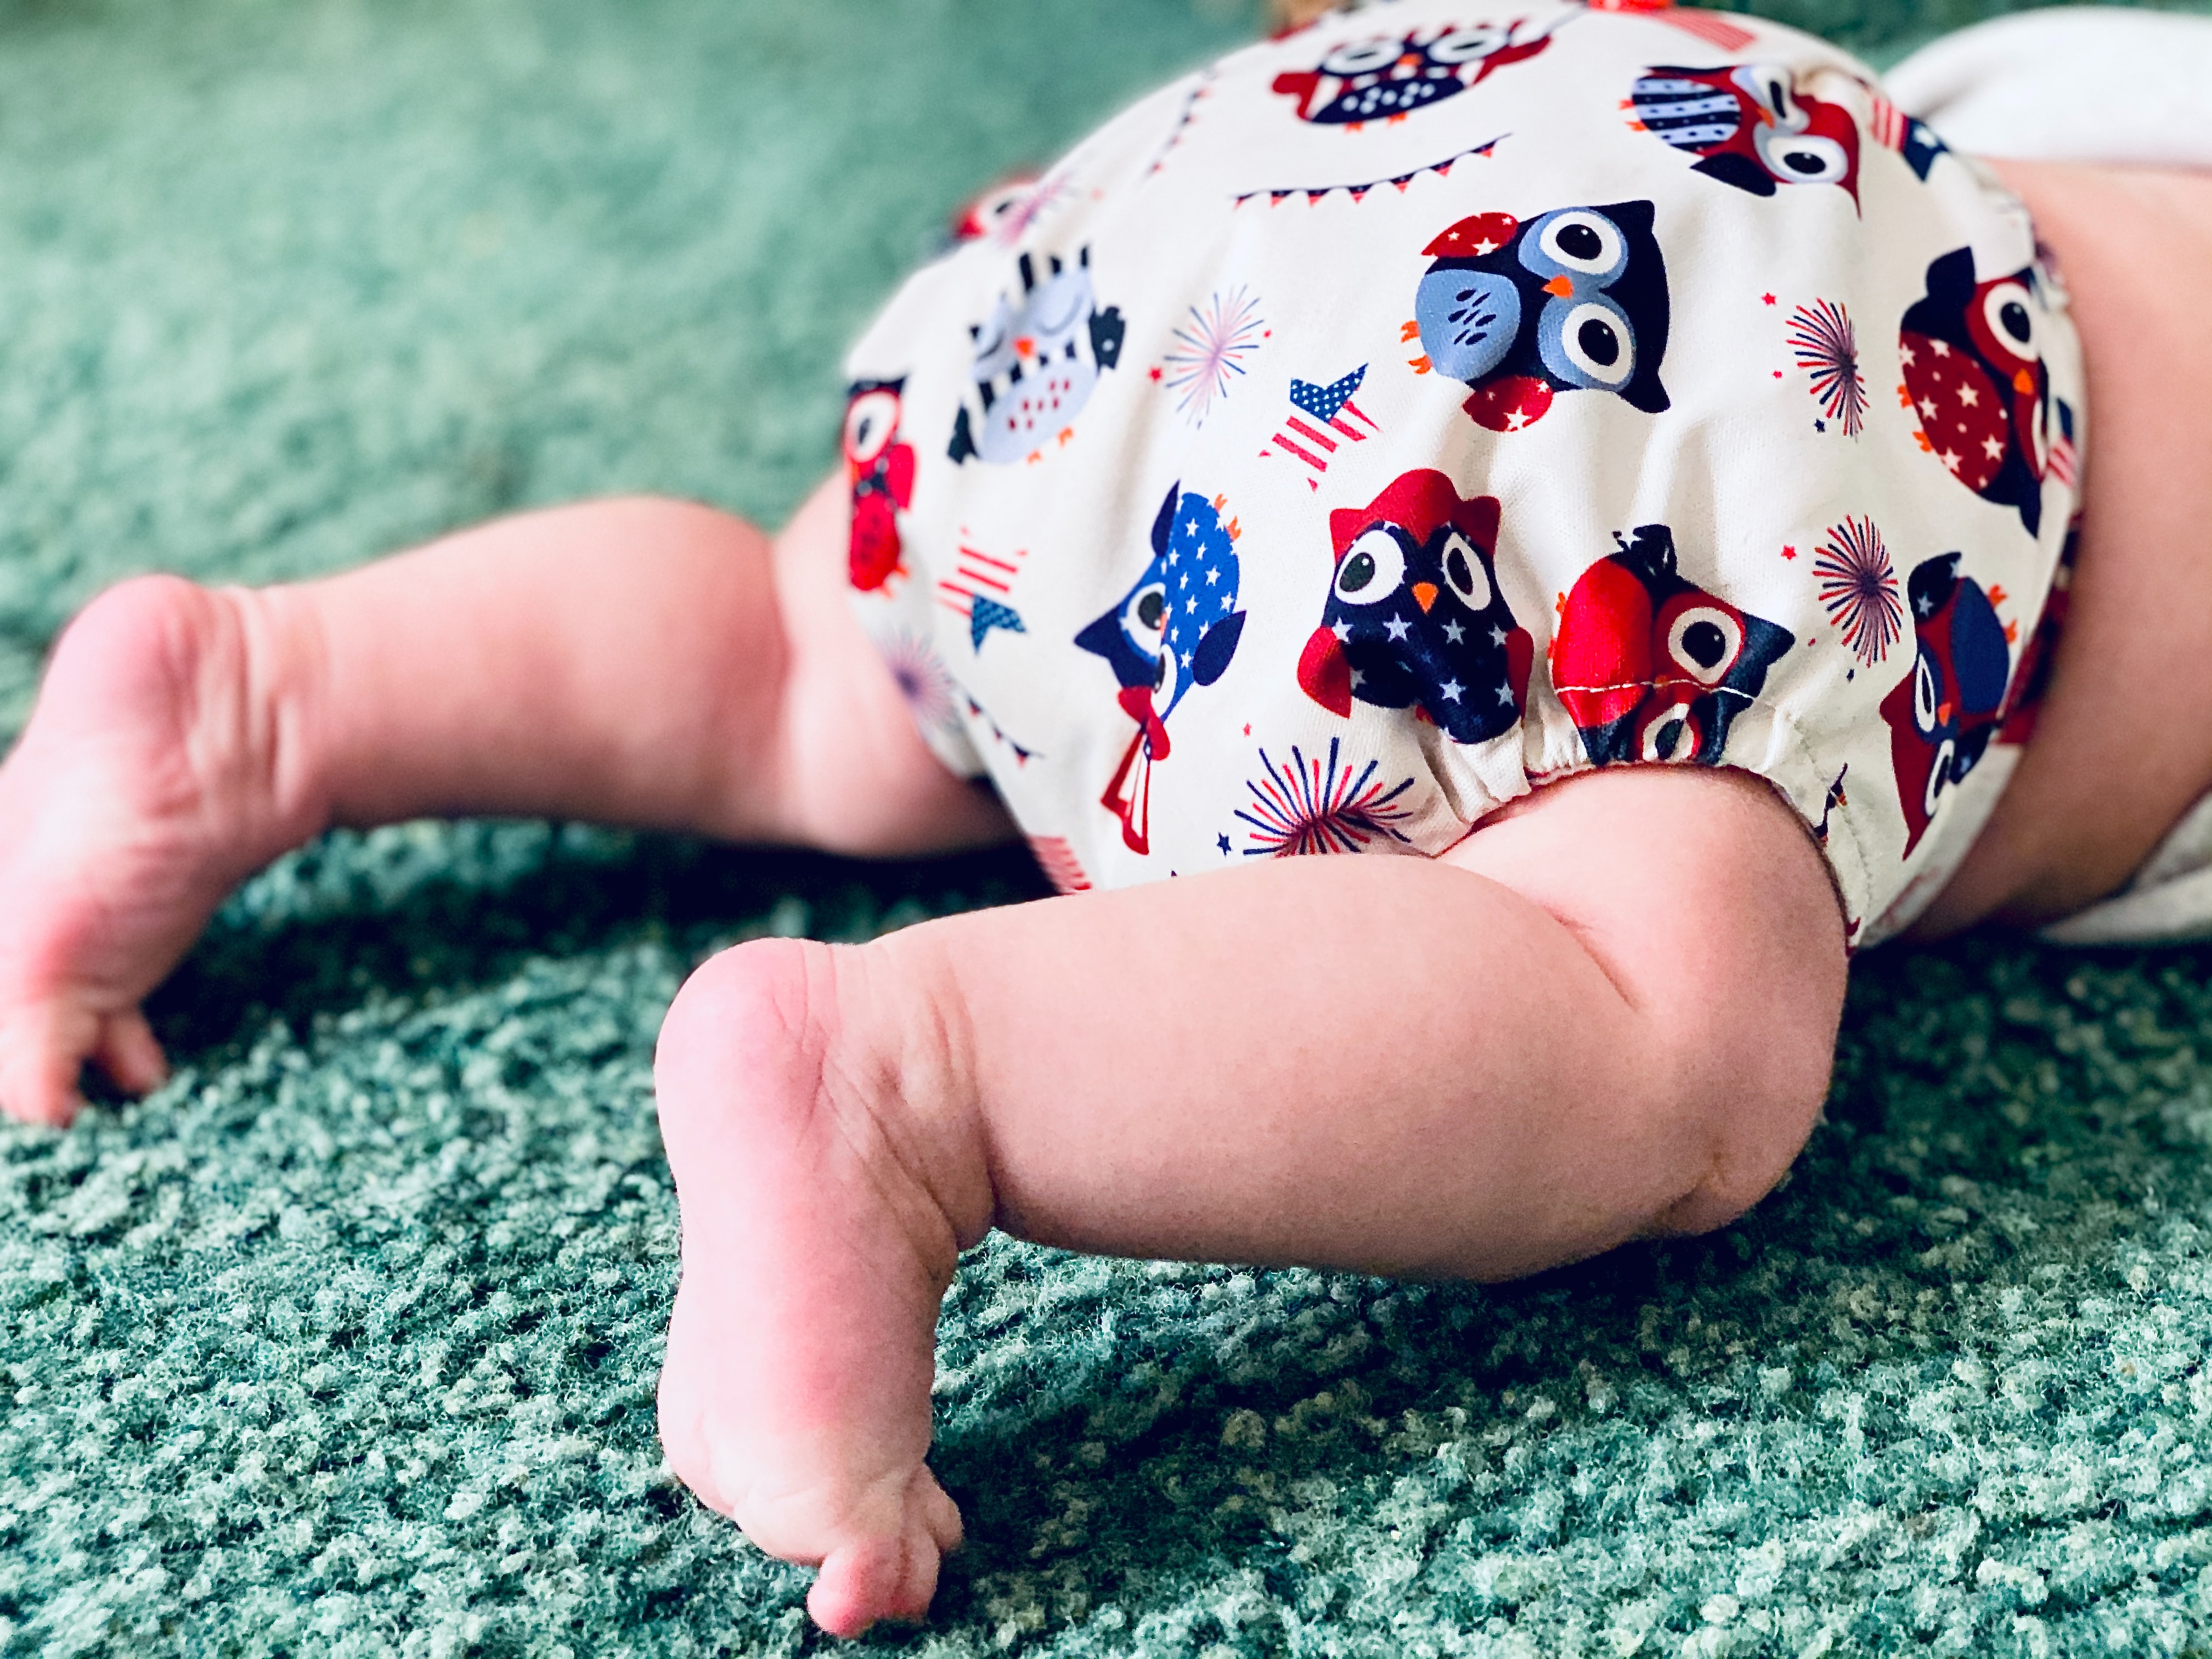 There\'s the bottom of a baby wearing a bulky, cloth diaper with an owl design.